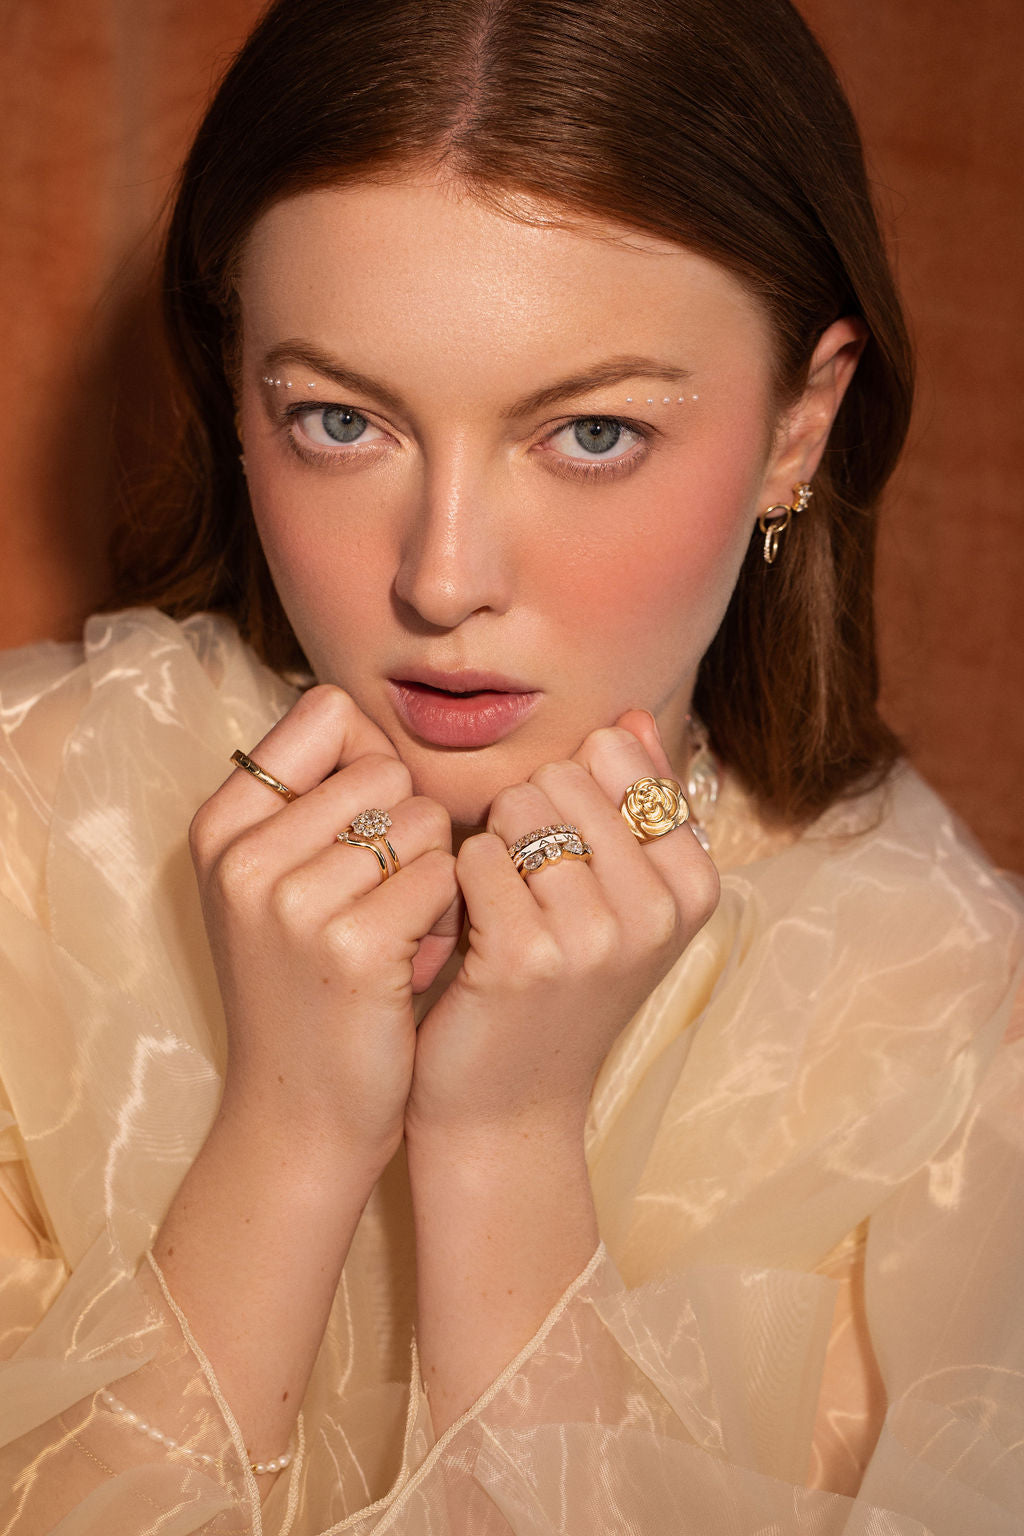 woman looking at the camera with Marrow Fine jewelry on (rings and earrings)